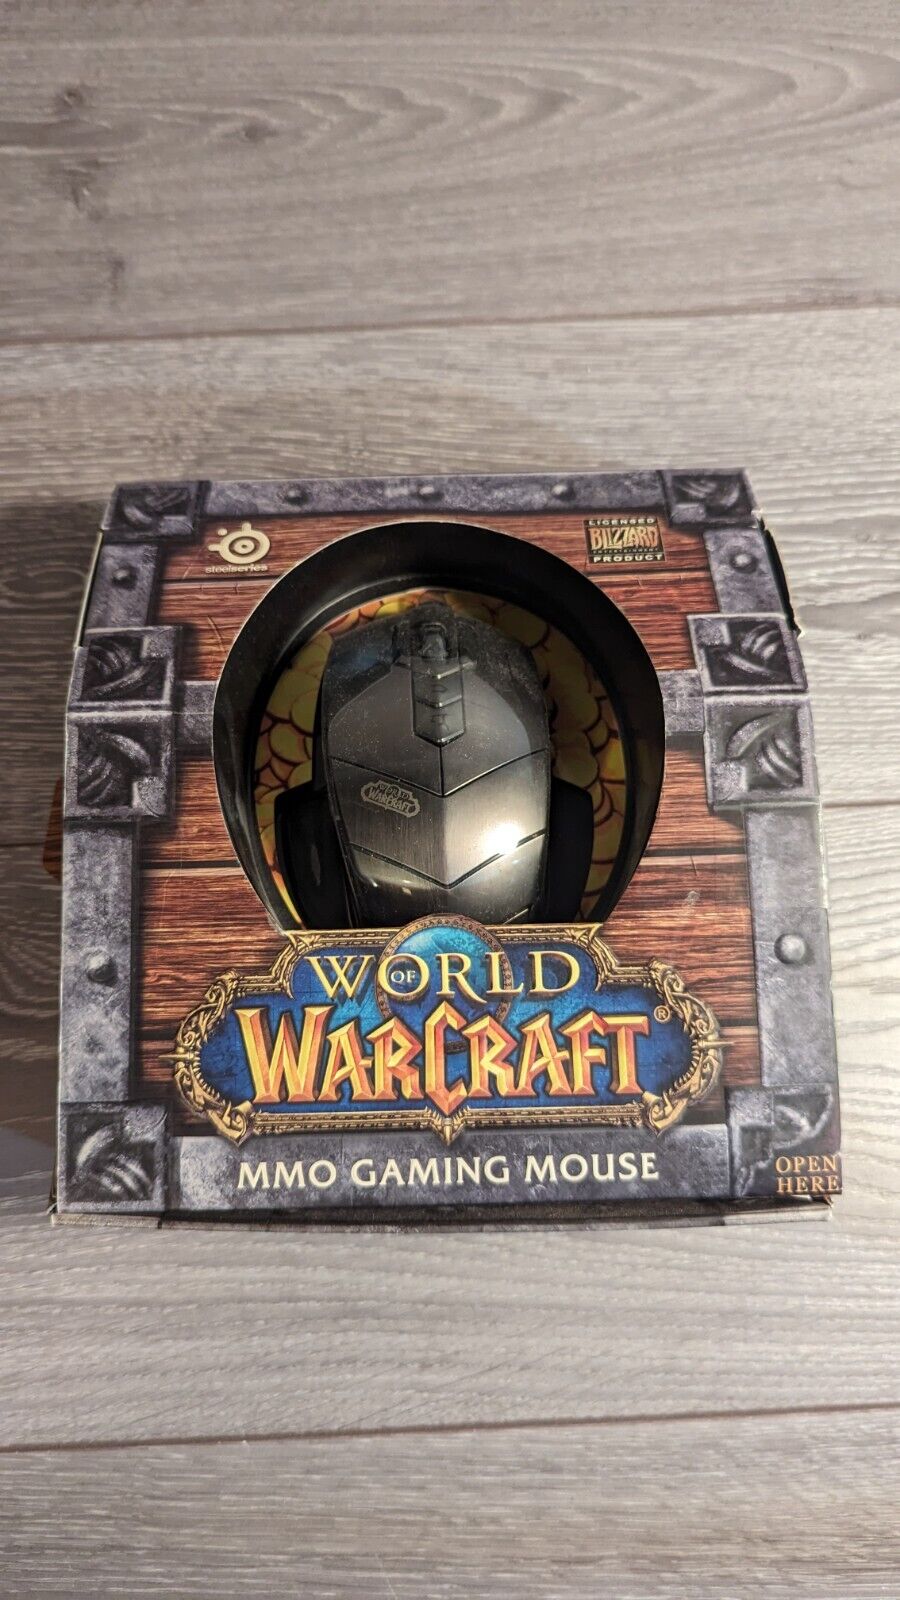 World of Warcraft Gaming Mouse SteelSeries WOW